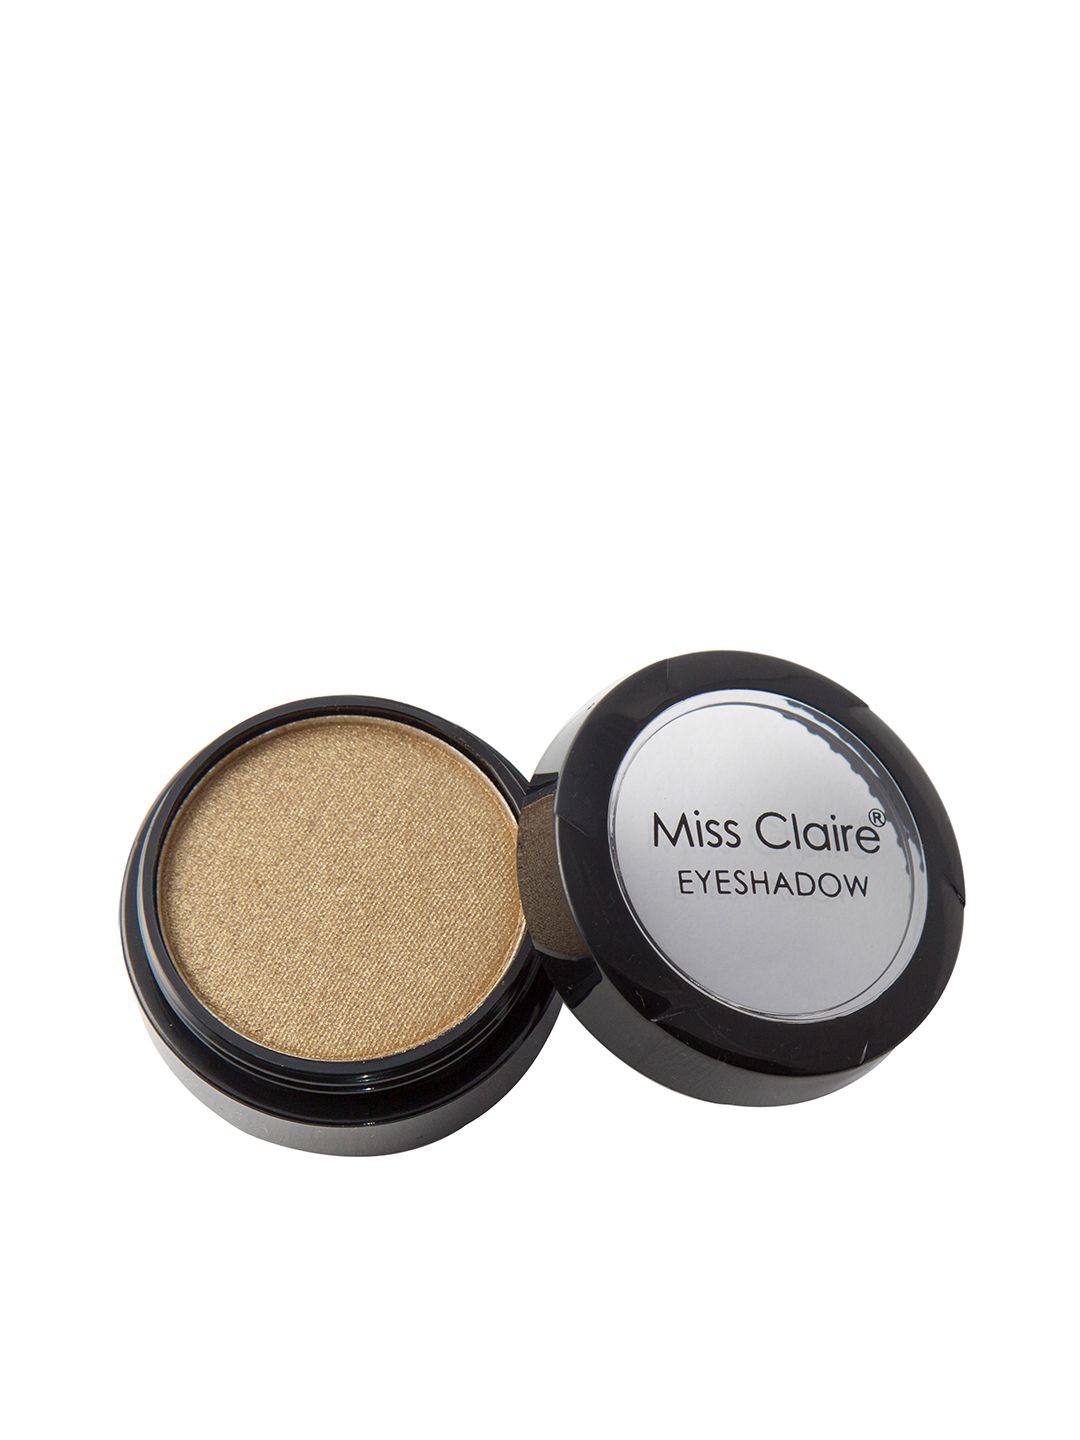 Miss Claire 0913 Single Eyeshadow Price in India